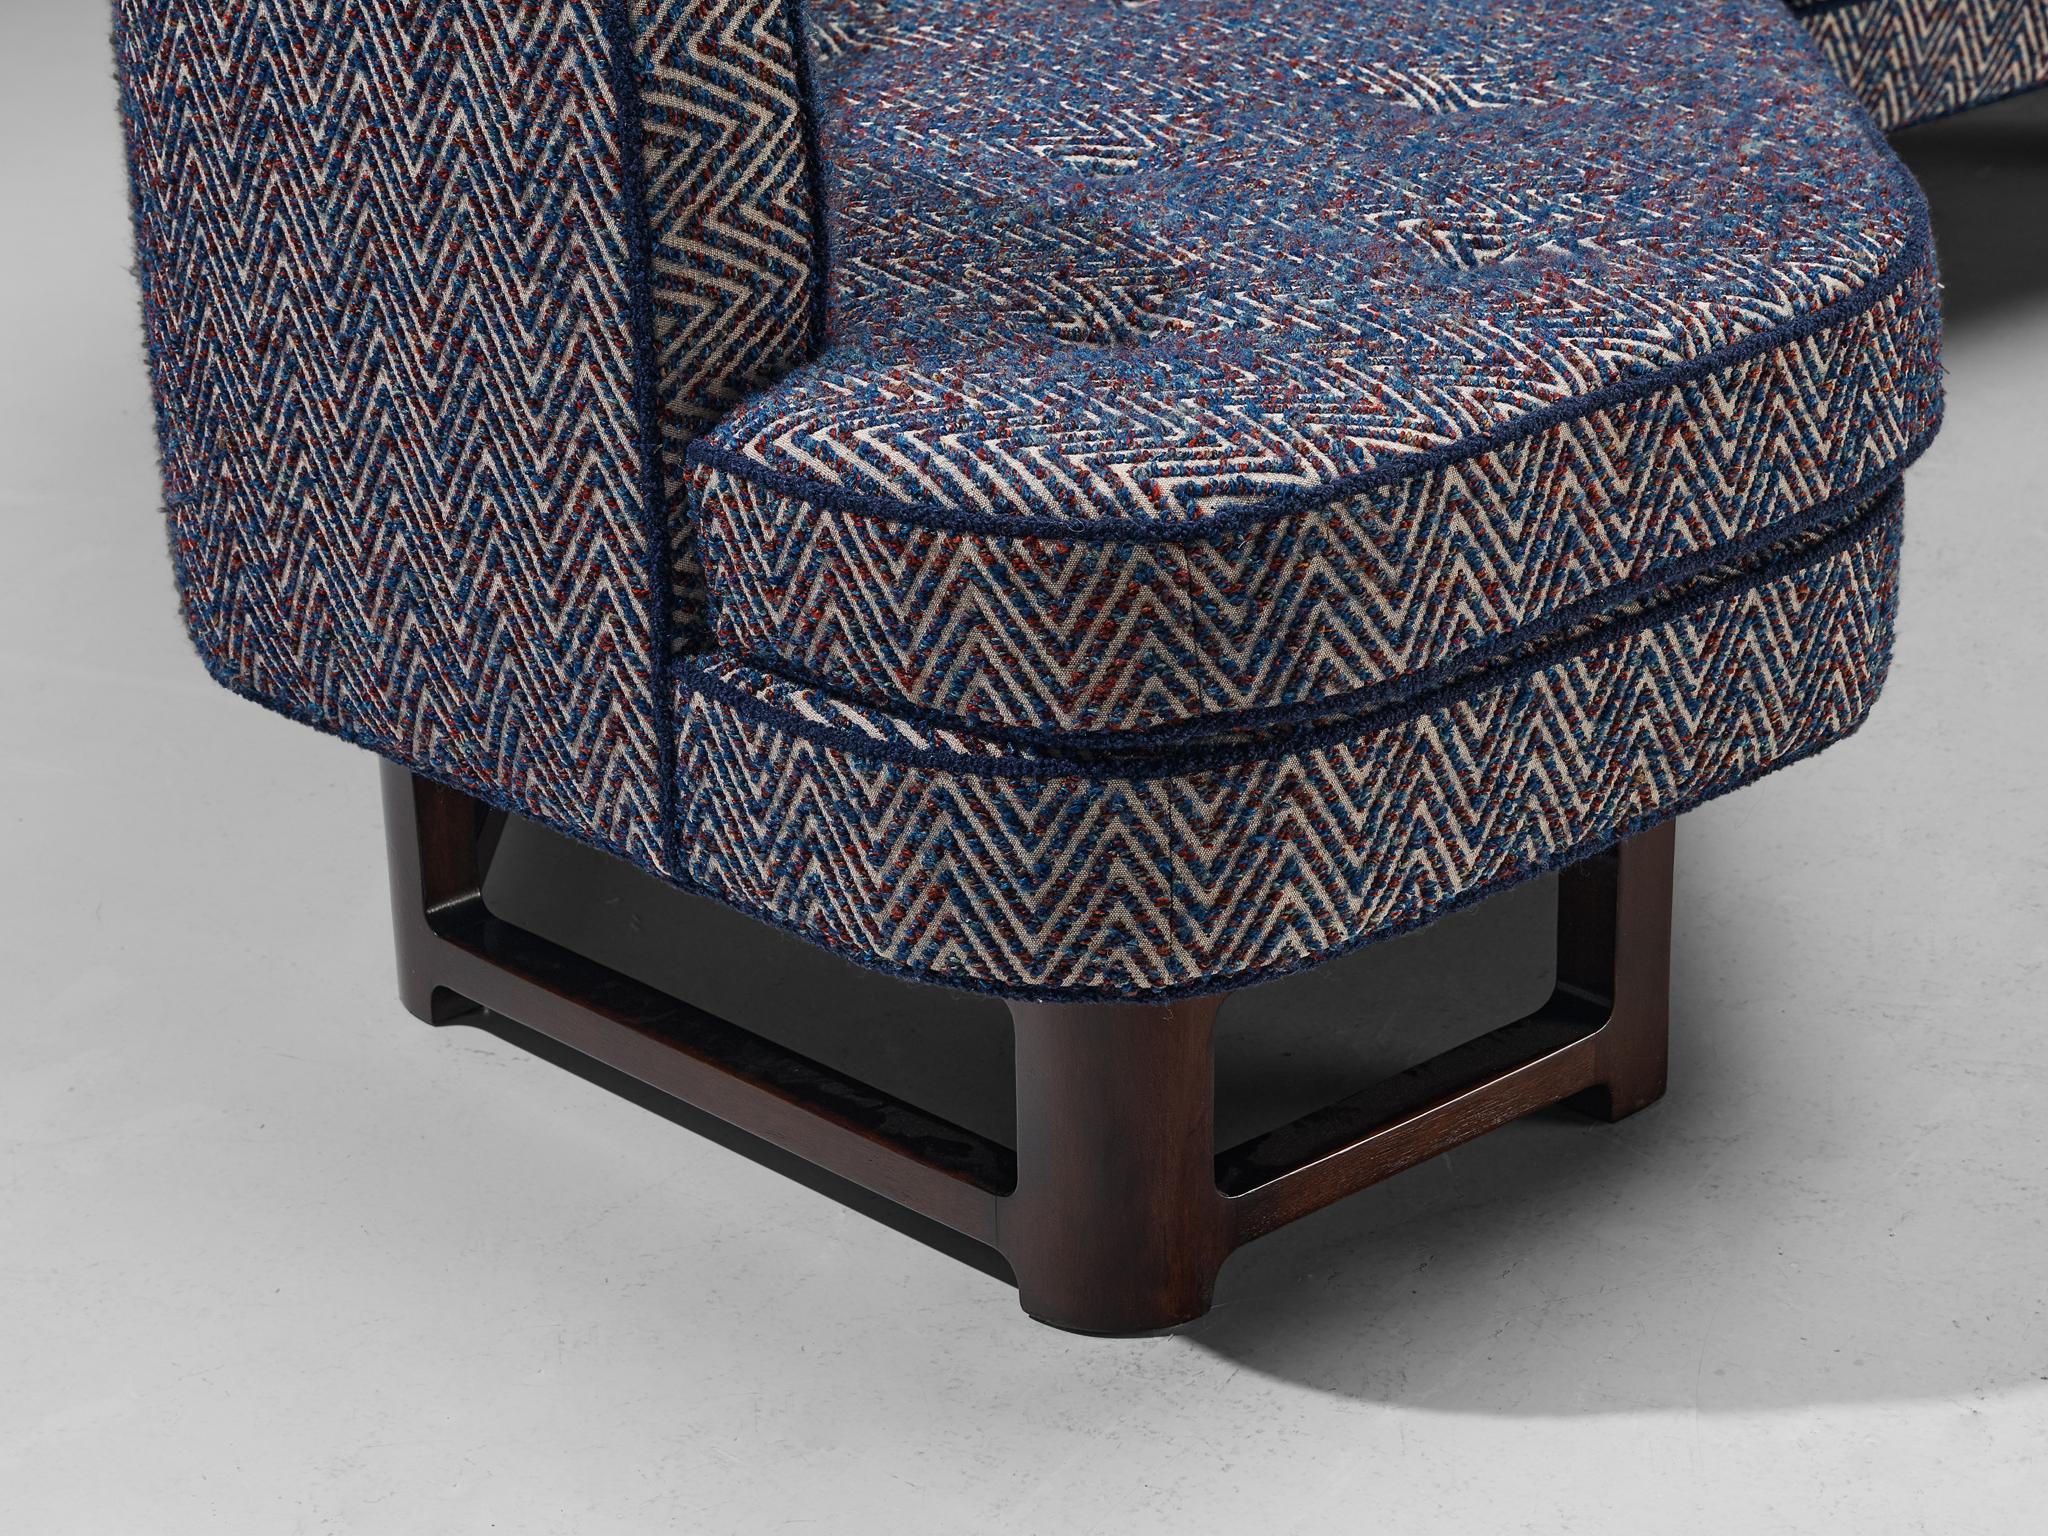 Mid-20th Century Edward Wormley for Dunbar 'Janus' Sofa in Multicolored Patterned Upholstery 